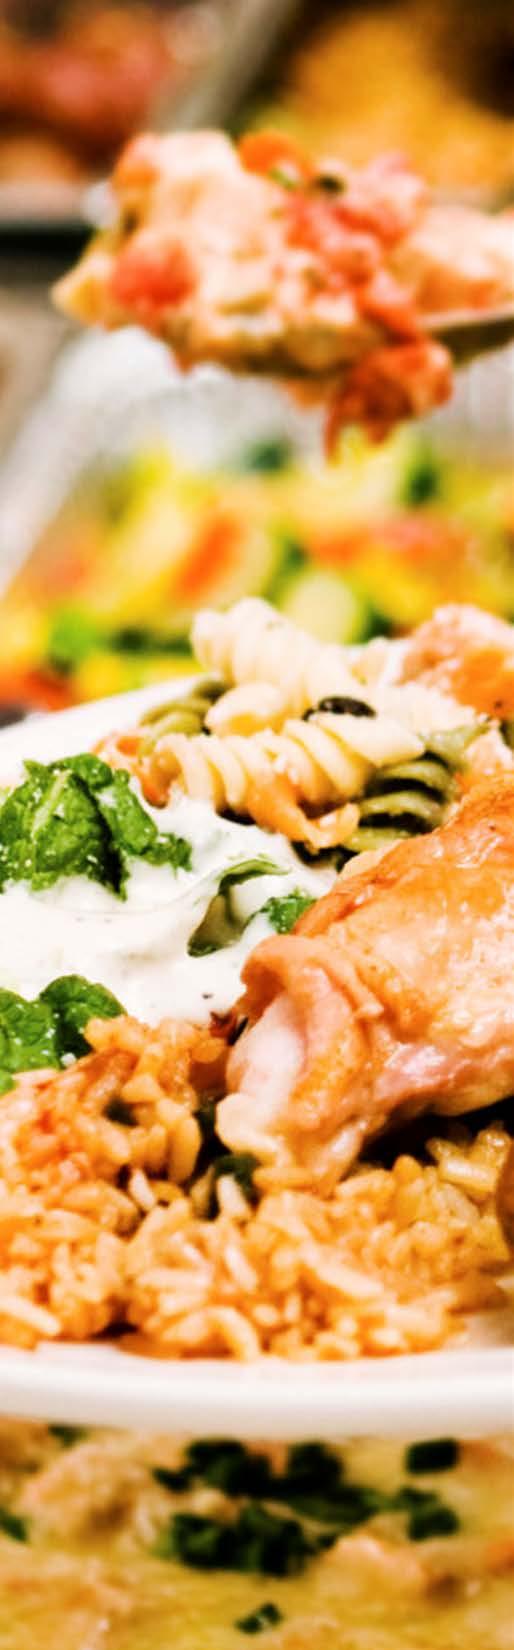 Buffet Meal All Served or Buffet Meals include: One (1) Salad Selection: Caesar, Spinach Mixed Green Salad One (1) Meat Entrée Selection: Mediterranean Chicken Grilled Salmon with mango Salsa